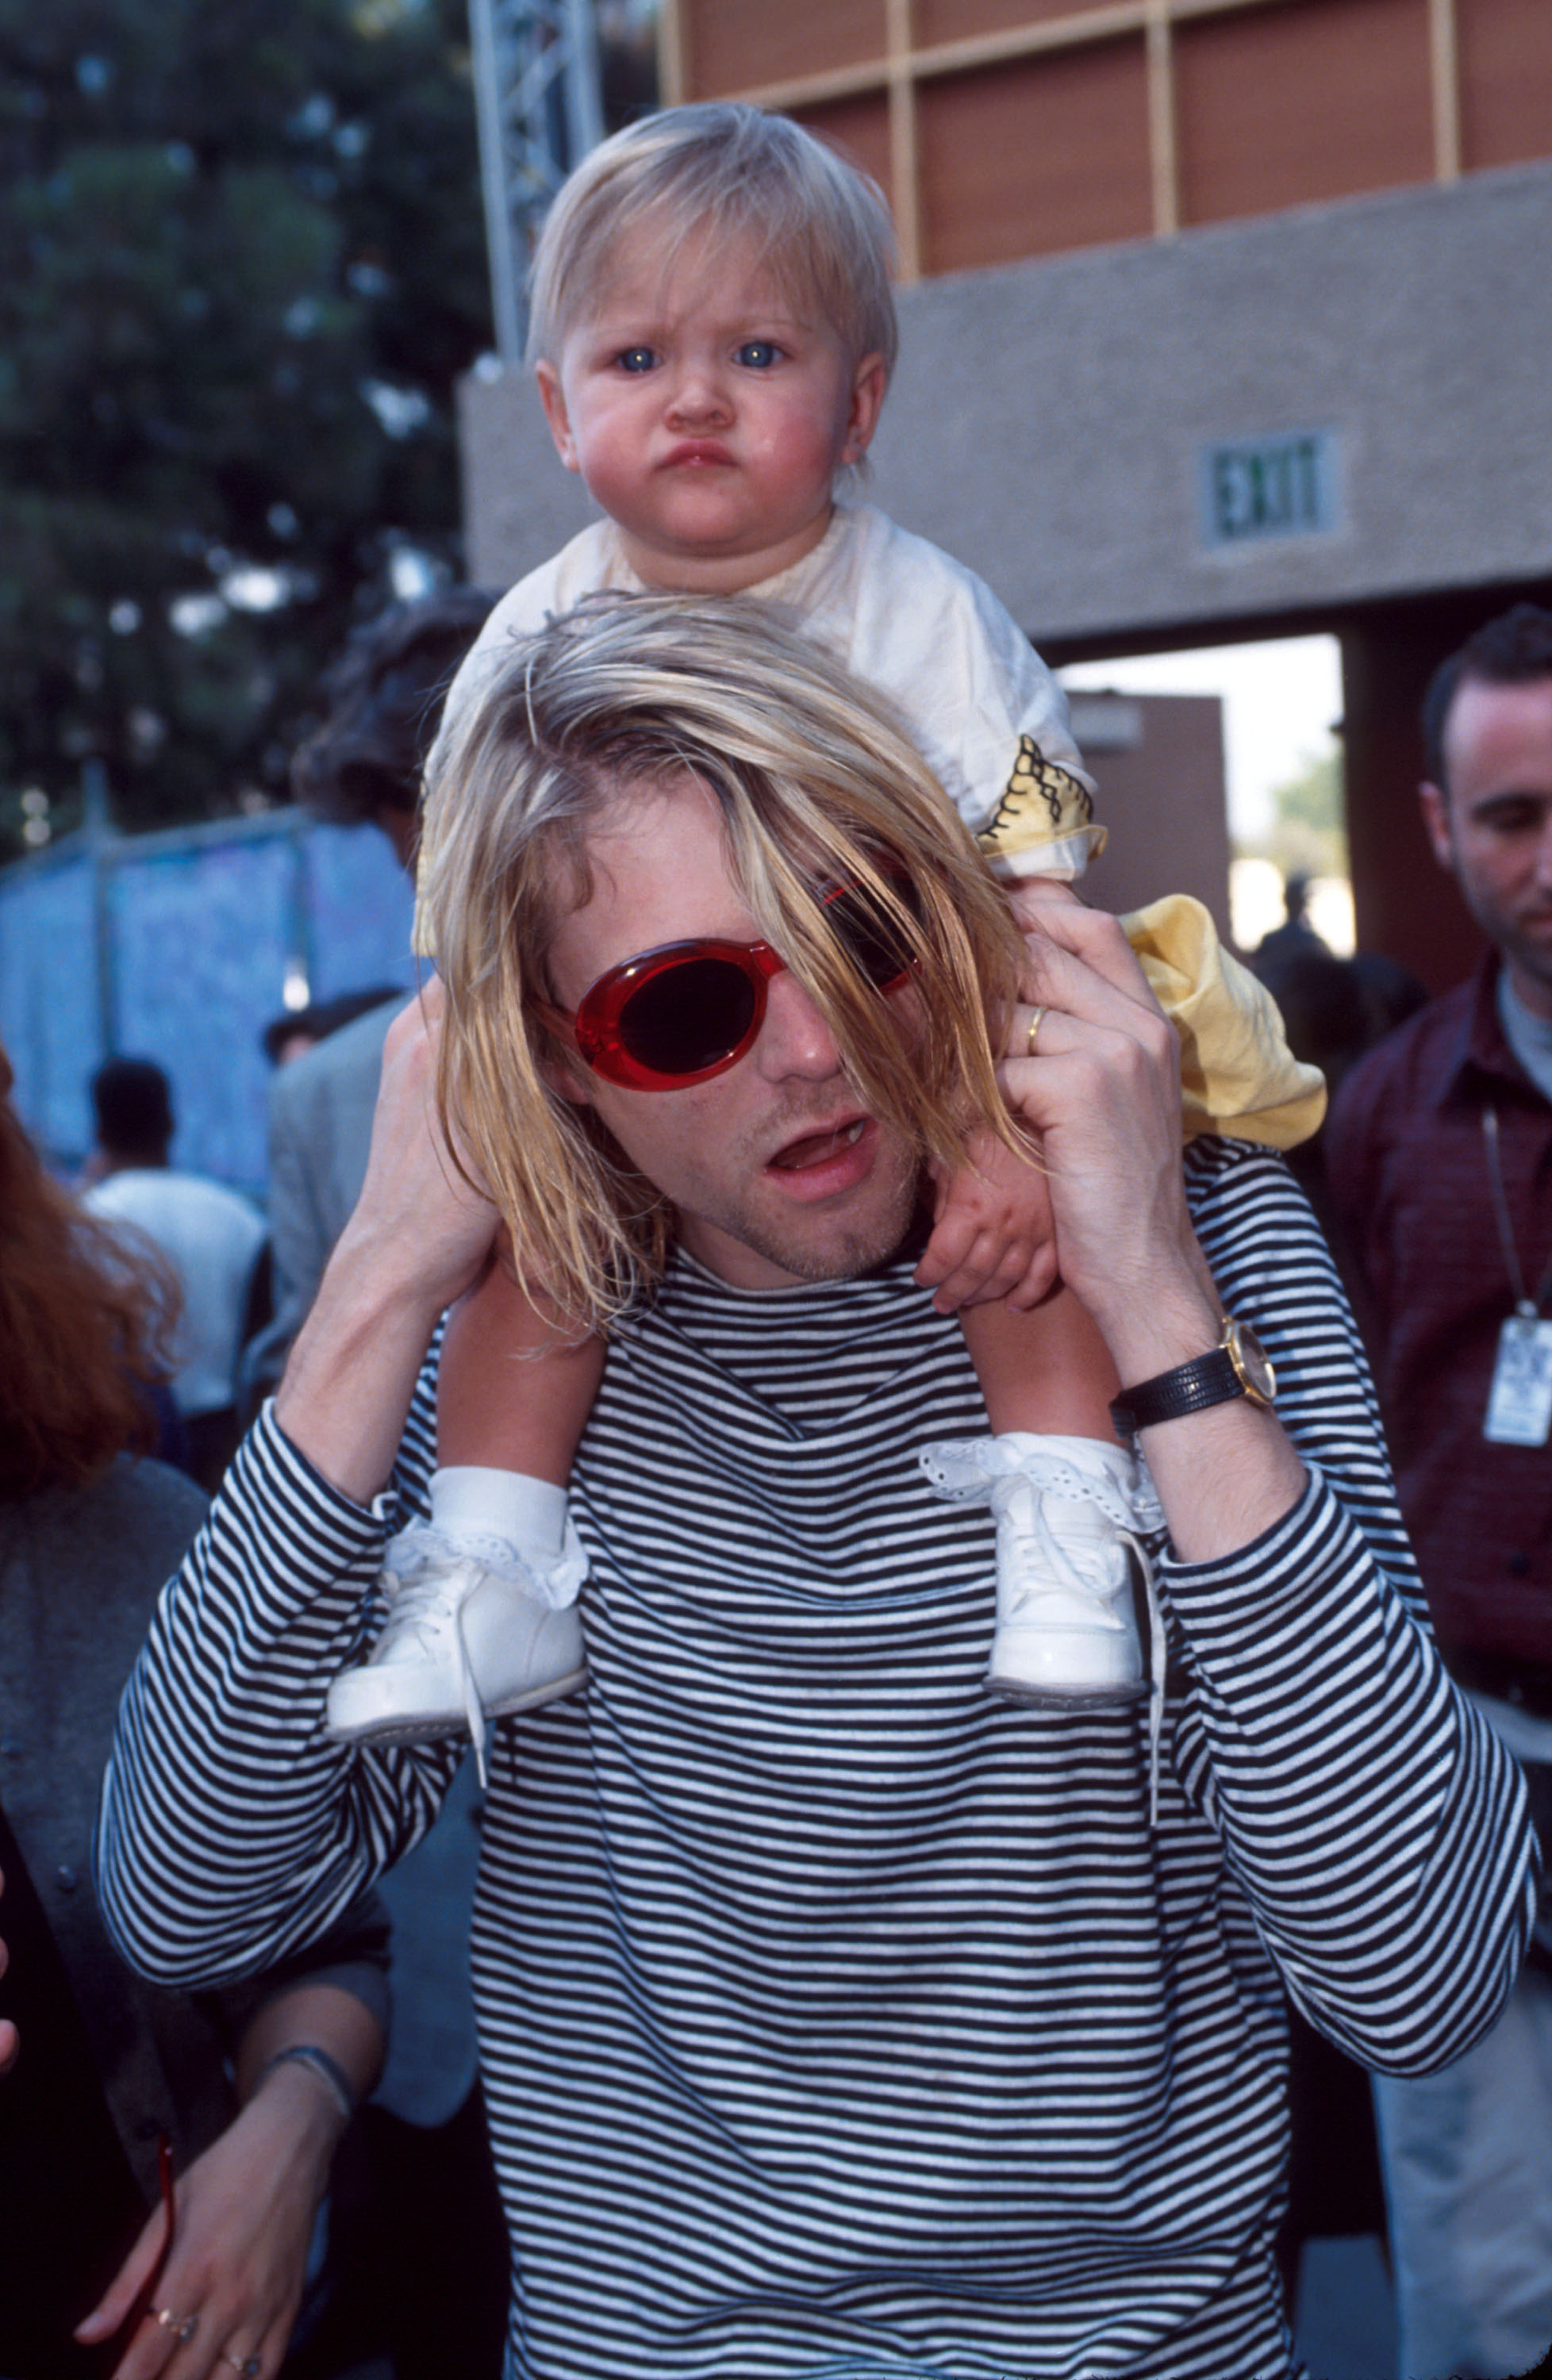 The late iconic rocker and his baby daughter at the 10th Annual MTV Video Music Awards in Los Angeles, California on September 2, 1993 | Source: Getty Images